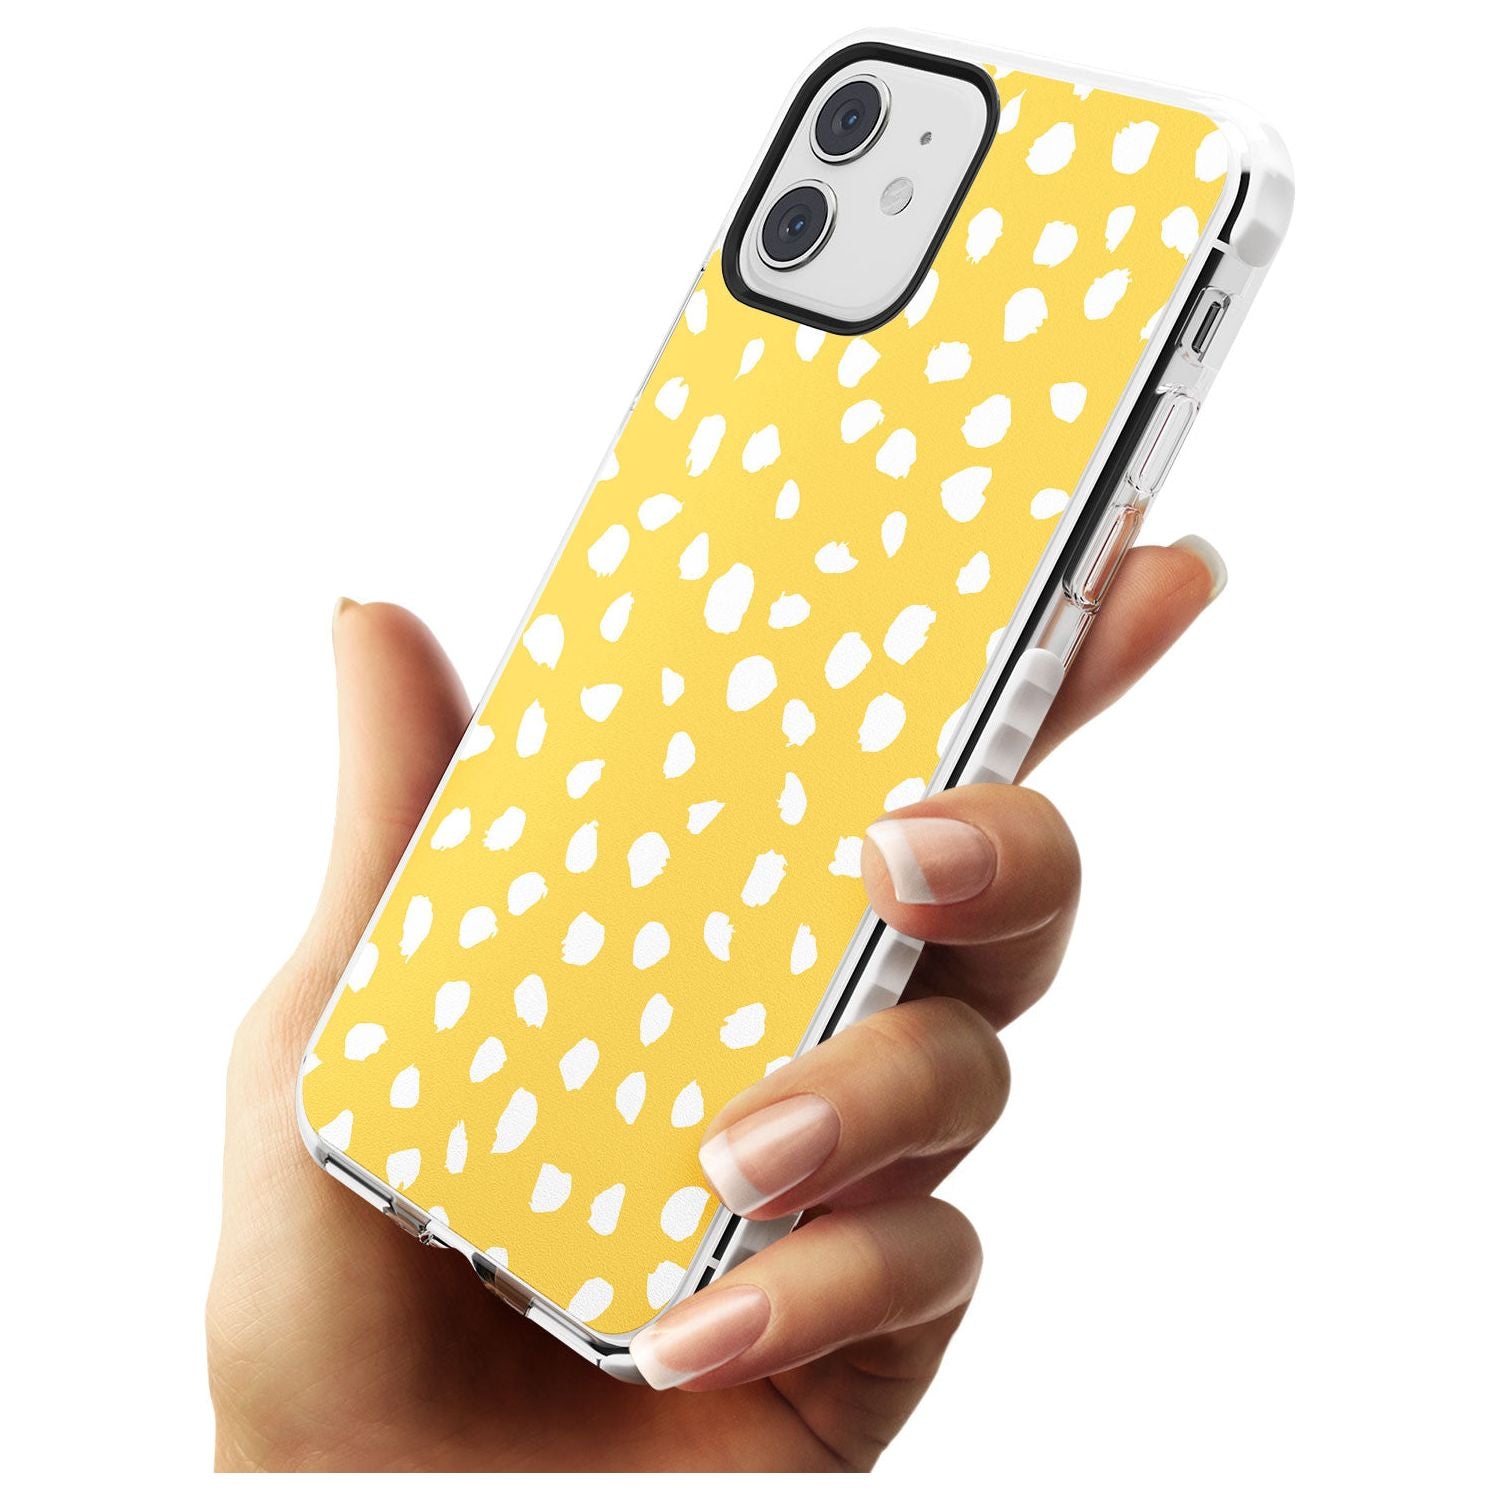 White on Yellow Dalmatian Polka Dot Spots Impact Phone Case for iPhone 11